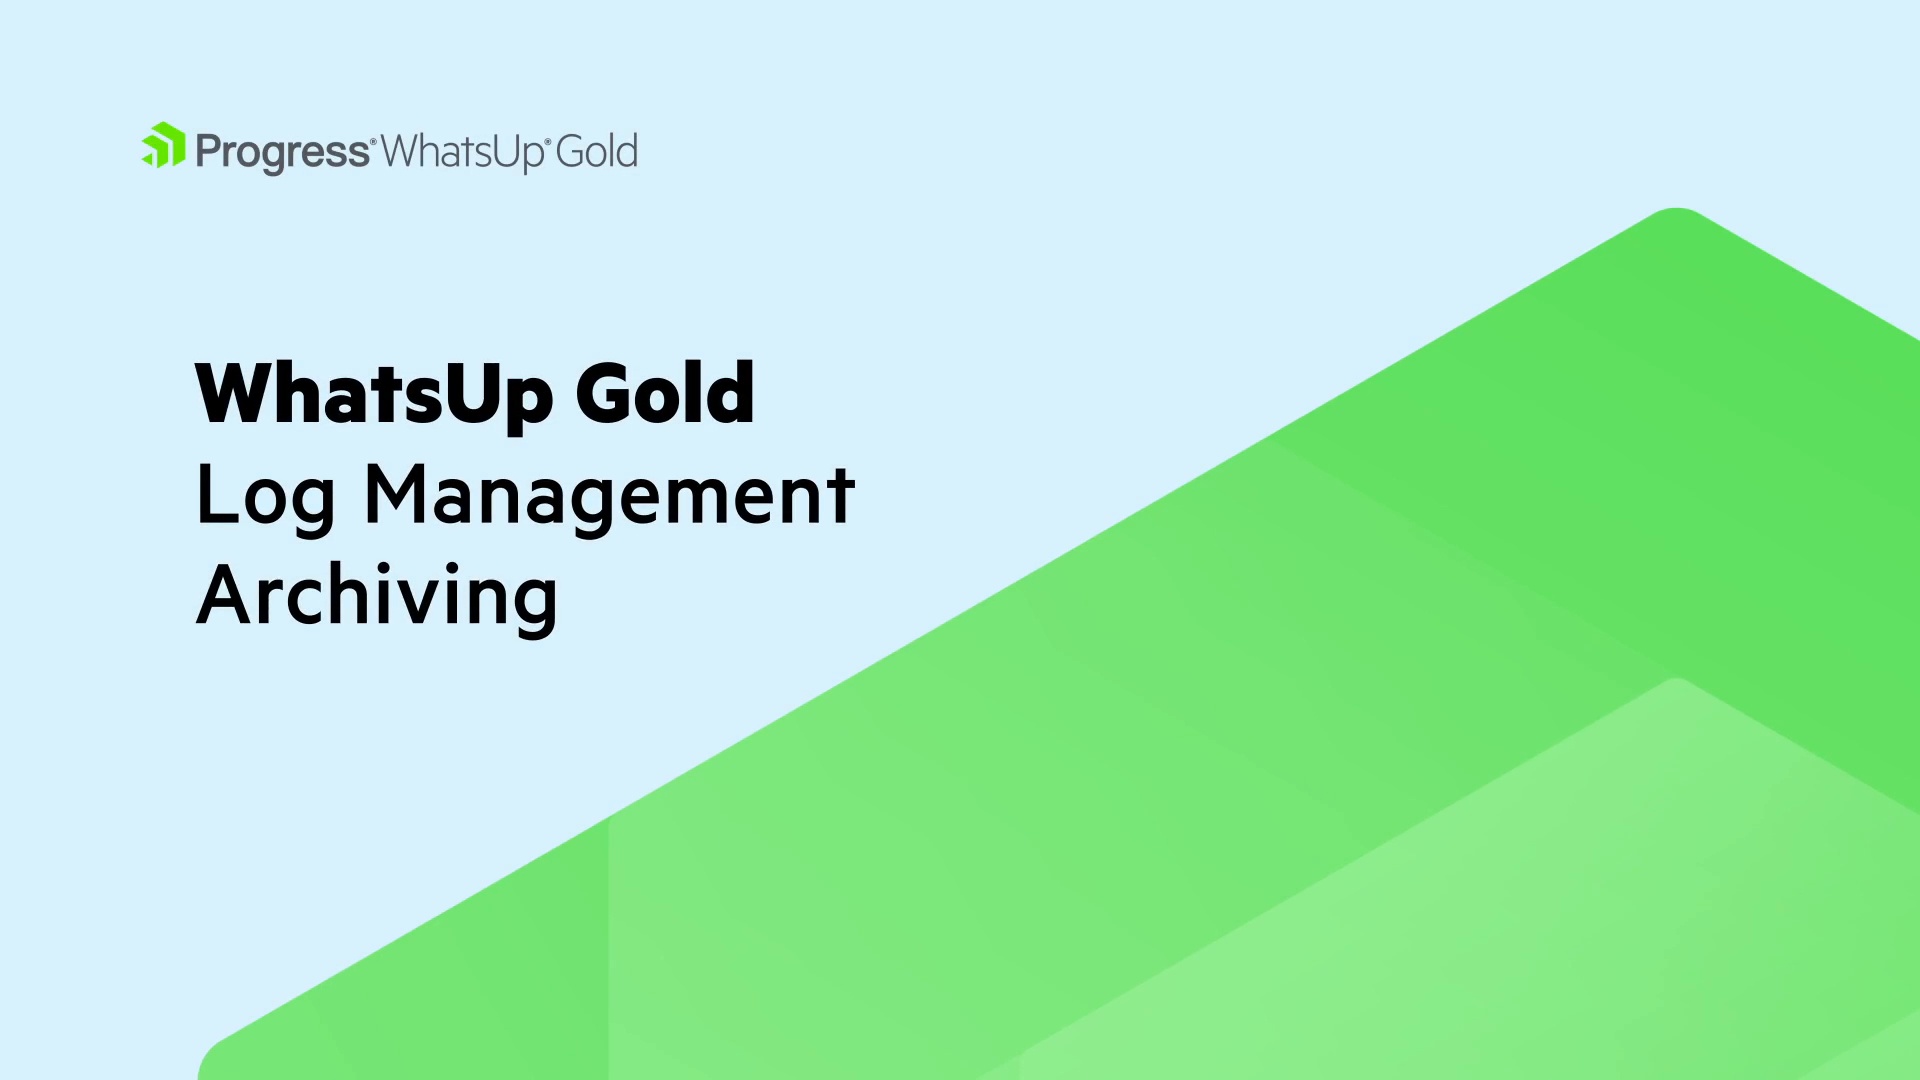 WhatsUp Gold Log Management Archiving